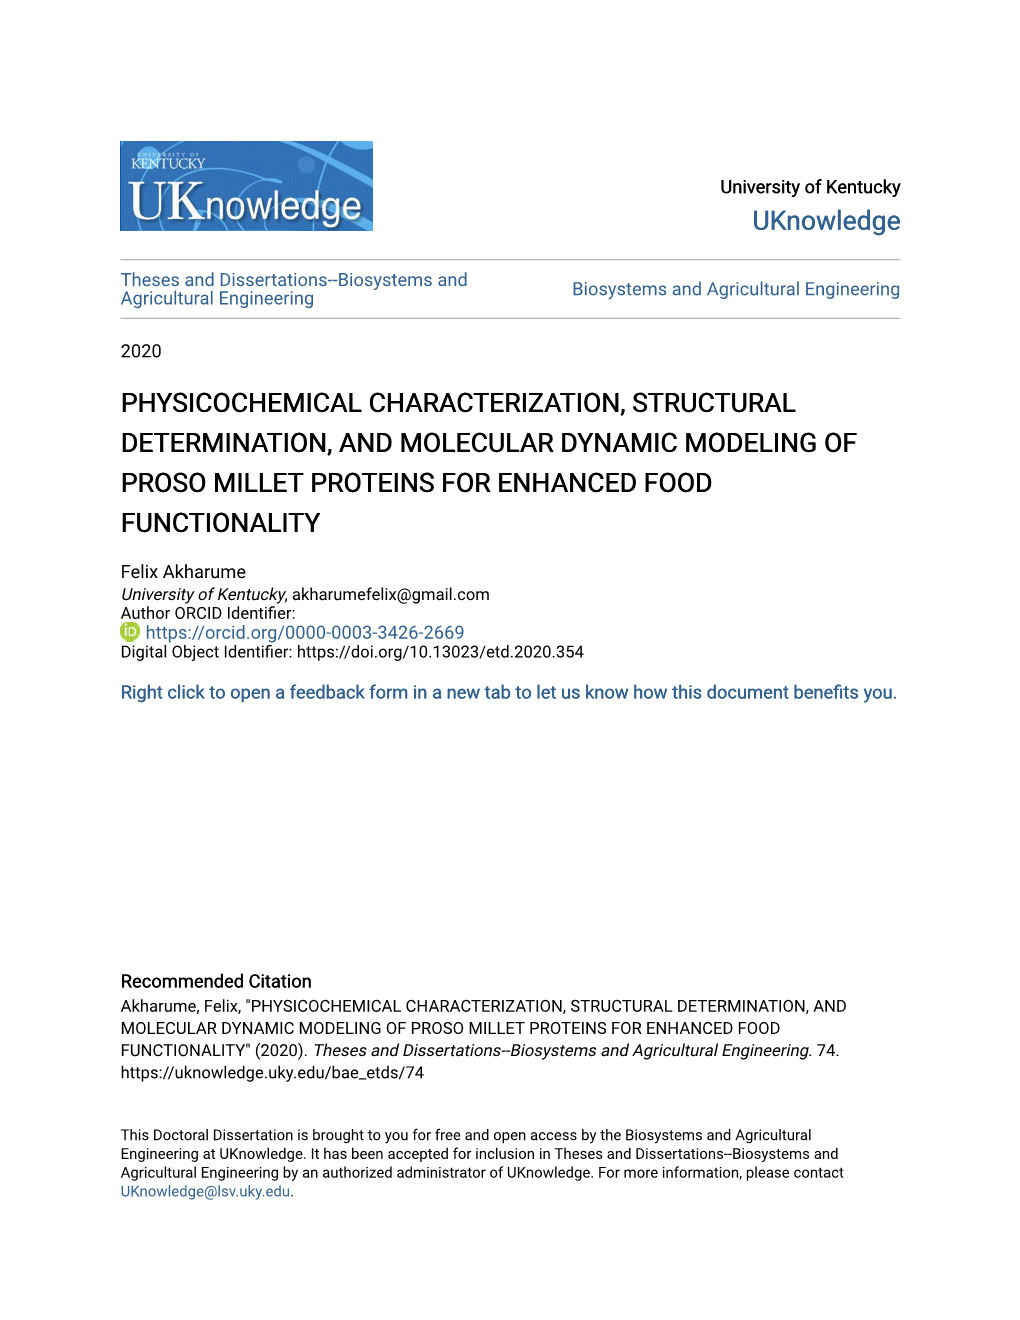 Physicochemical Characterization, Structural Determination, and Molecular Dynamic Modeling of Proso Millet Proteins for Enhanced Food Functionality